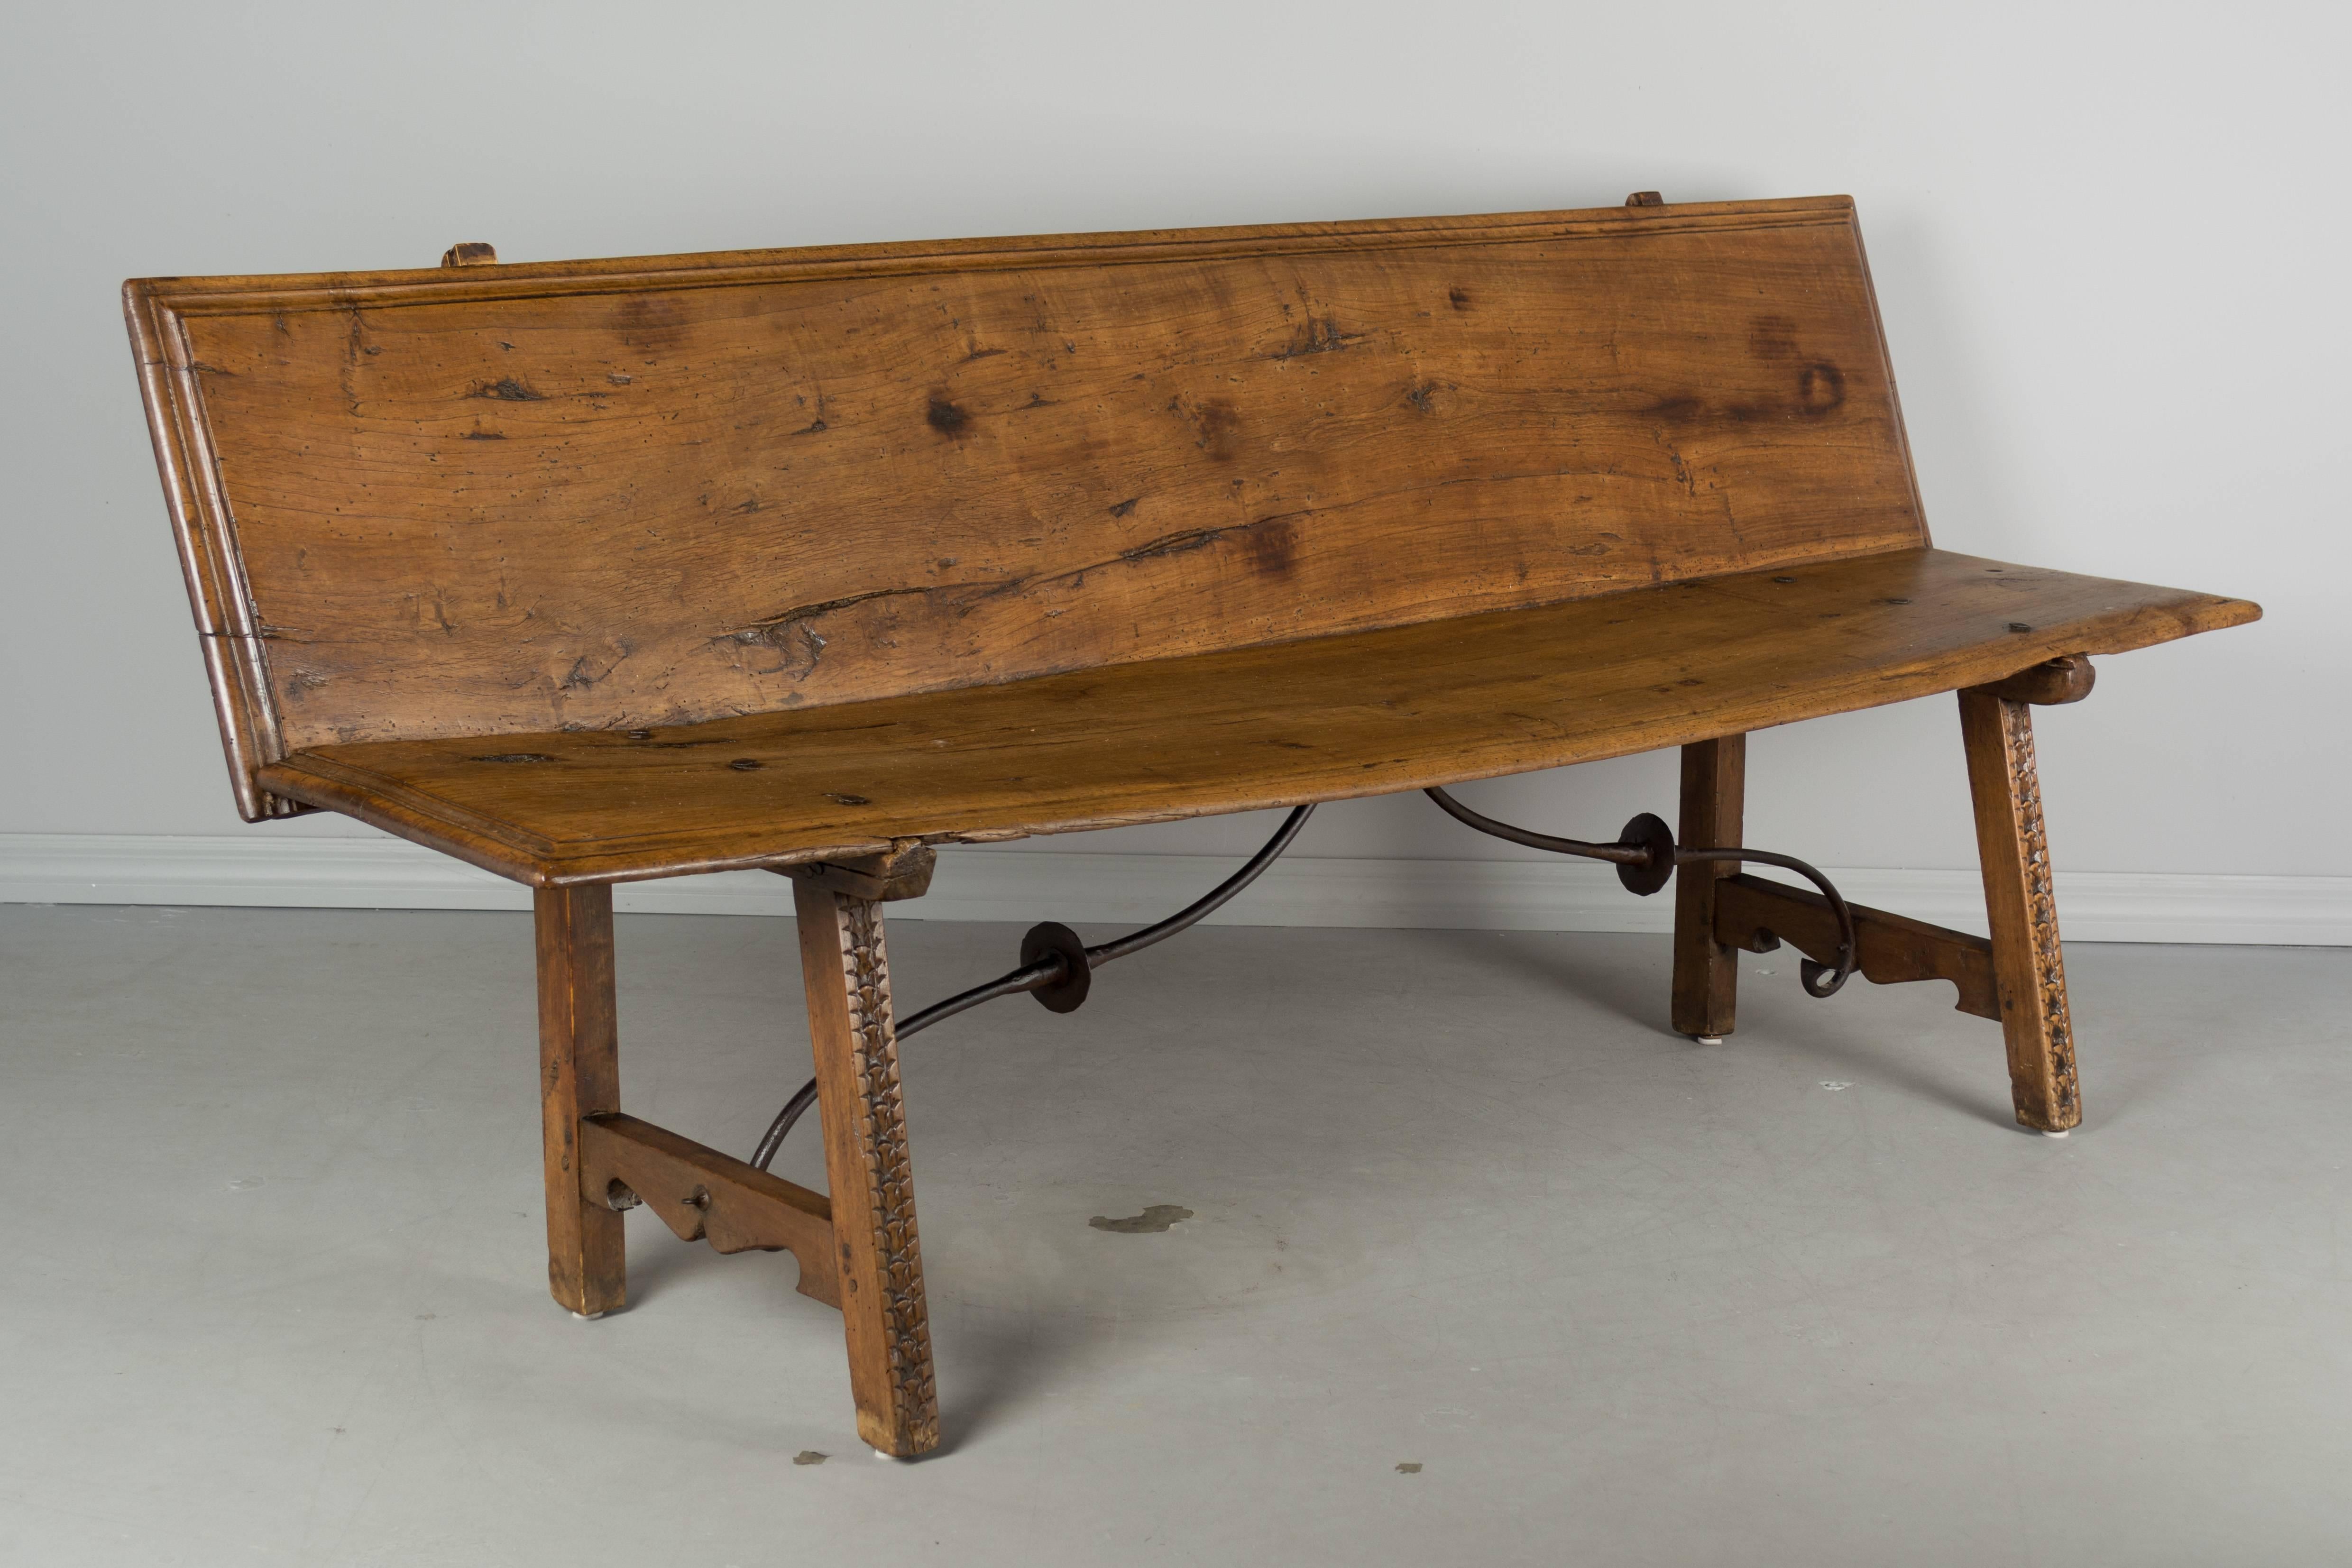 18th century Spanish Baroque style bench made from two solid walnut planks. Beautiful character to the wood with nice grain and natural knots. Waxed finish. Subtle hand-carved detail on the front of the legs. Wrought iron stretcher. Very sturdy with